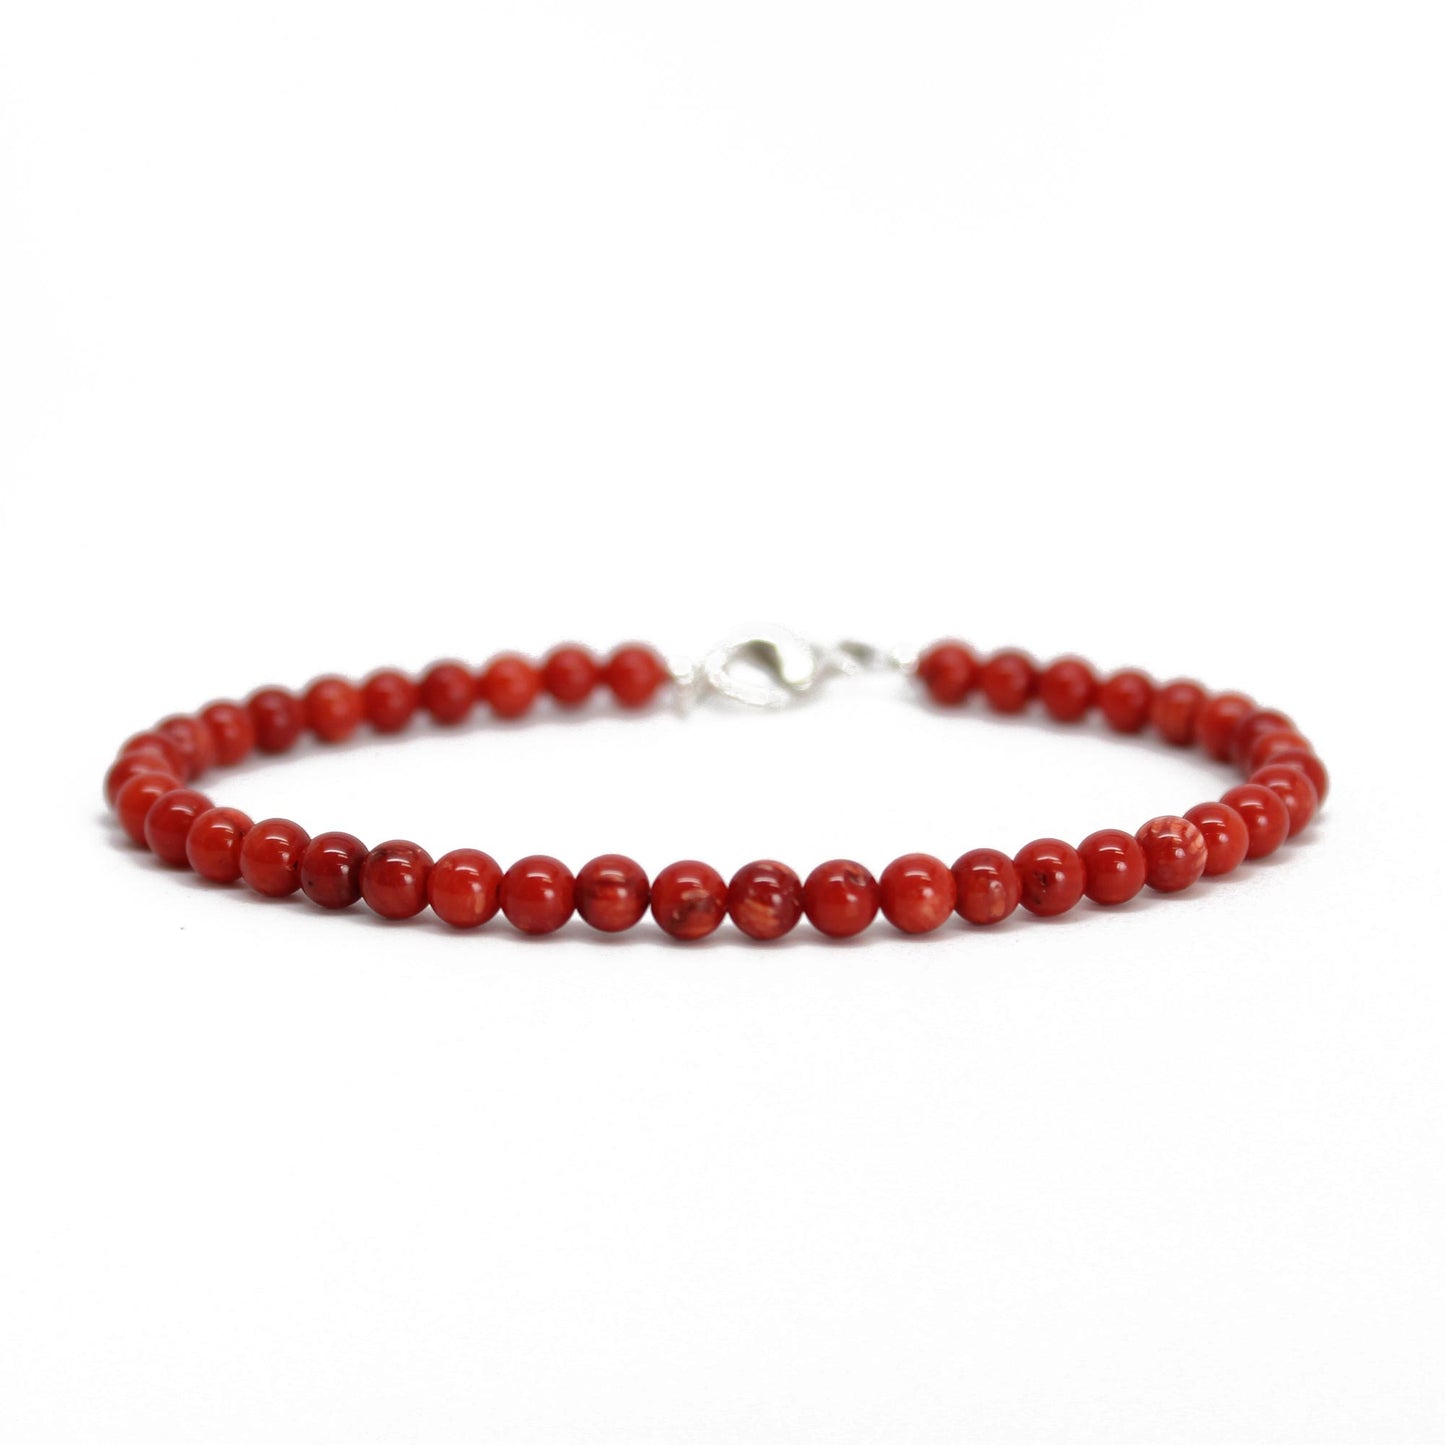 READY TO SHIP Freshwater Pearl Red Coral Bracelet - FJD$